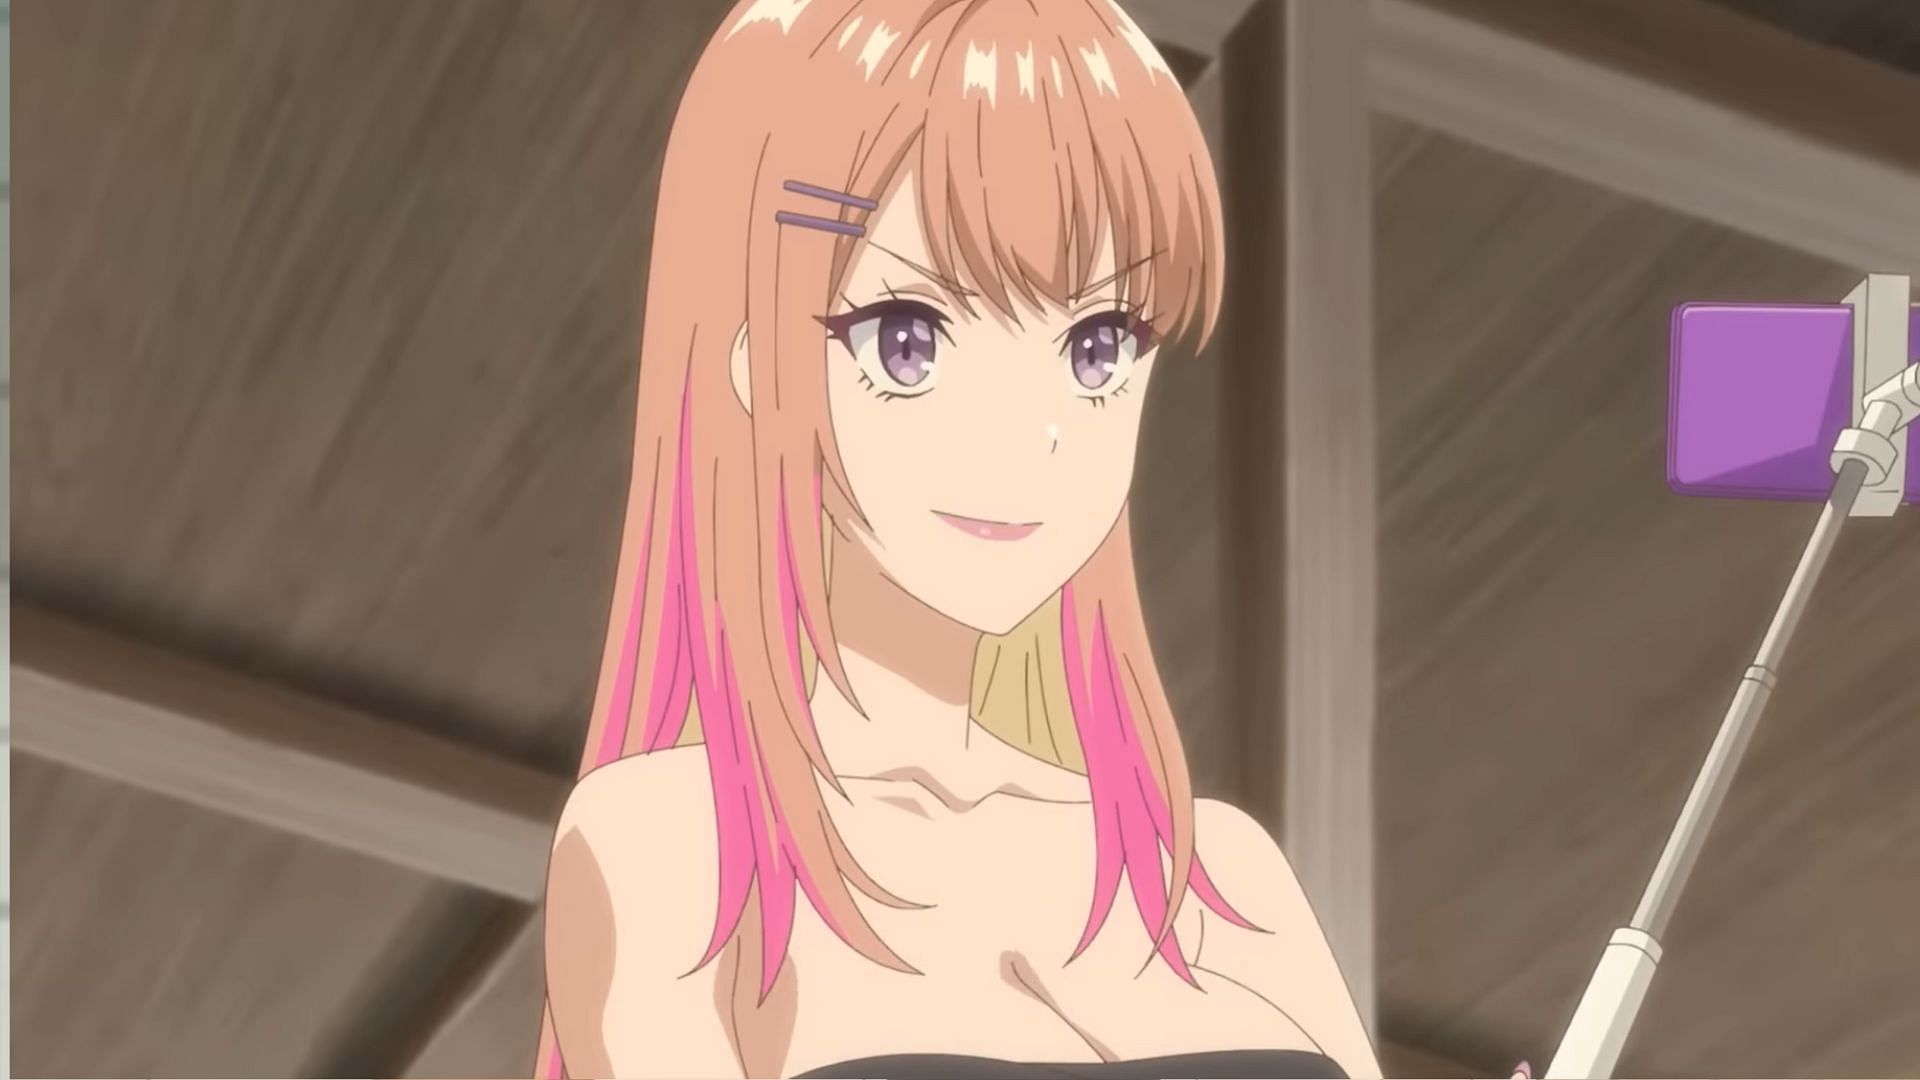 Watch The Quintessential Quintuplets season 2 episode 7 streaming online